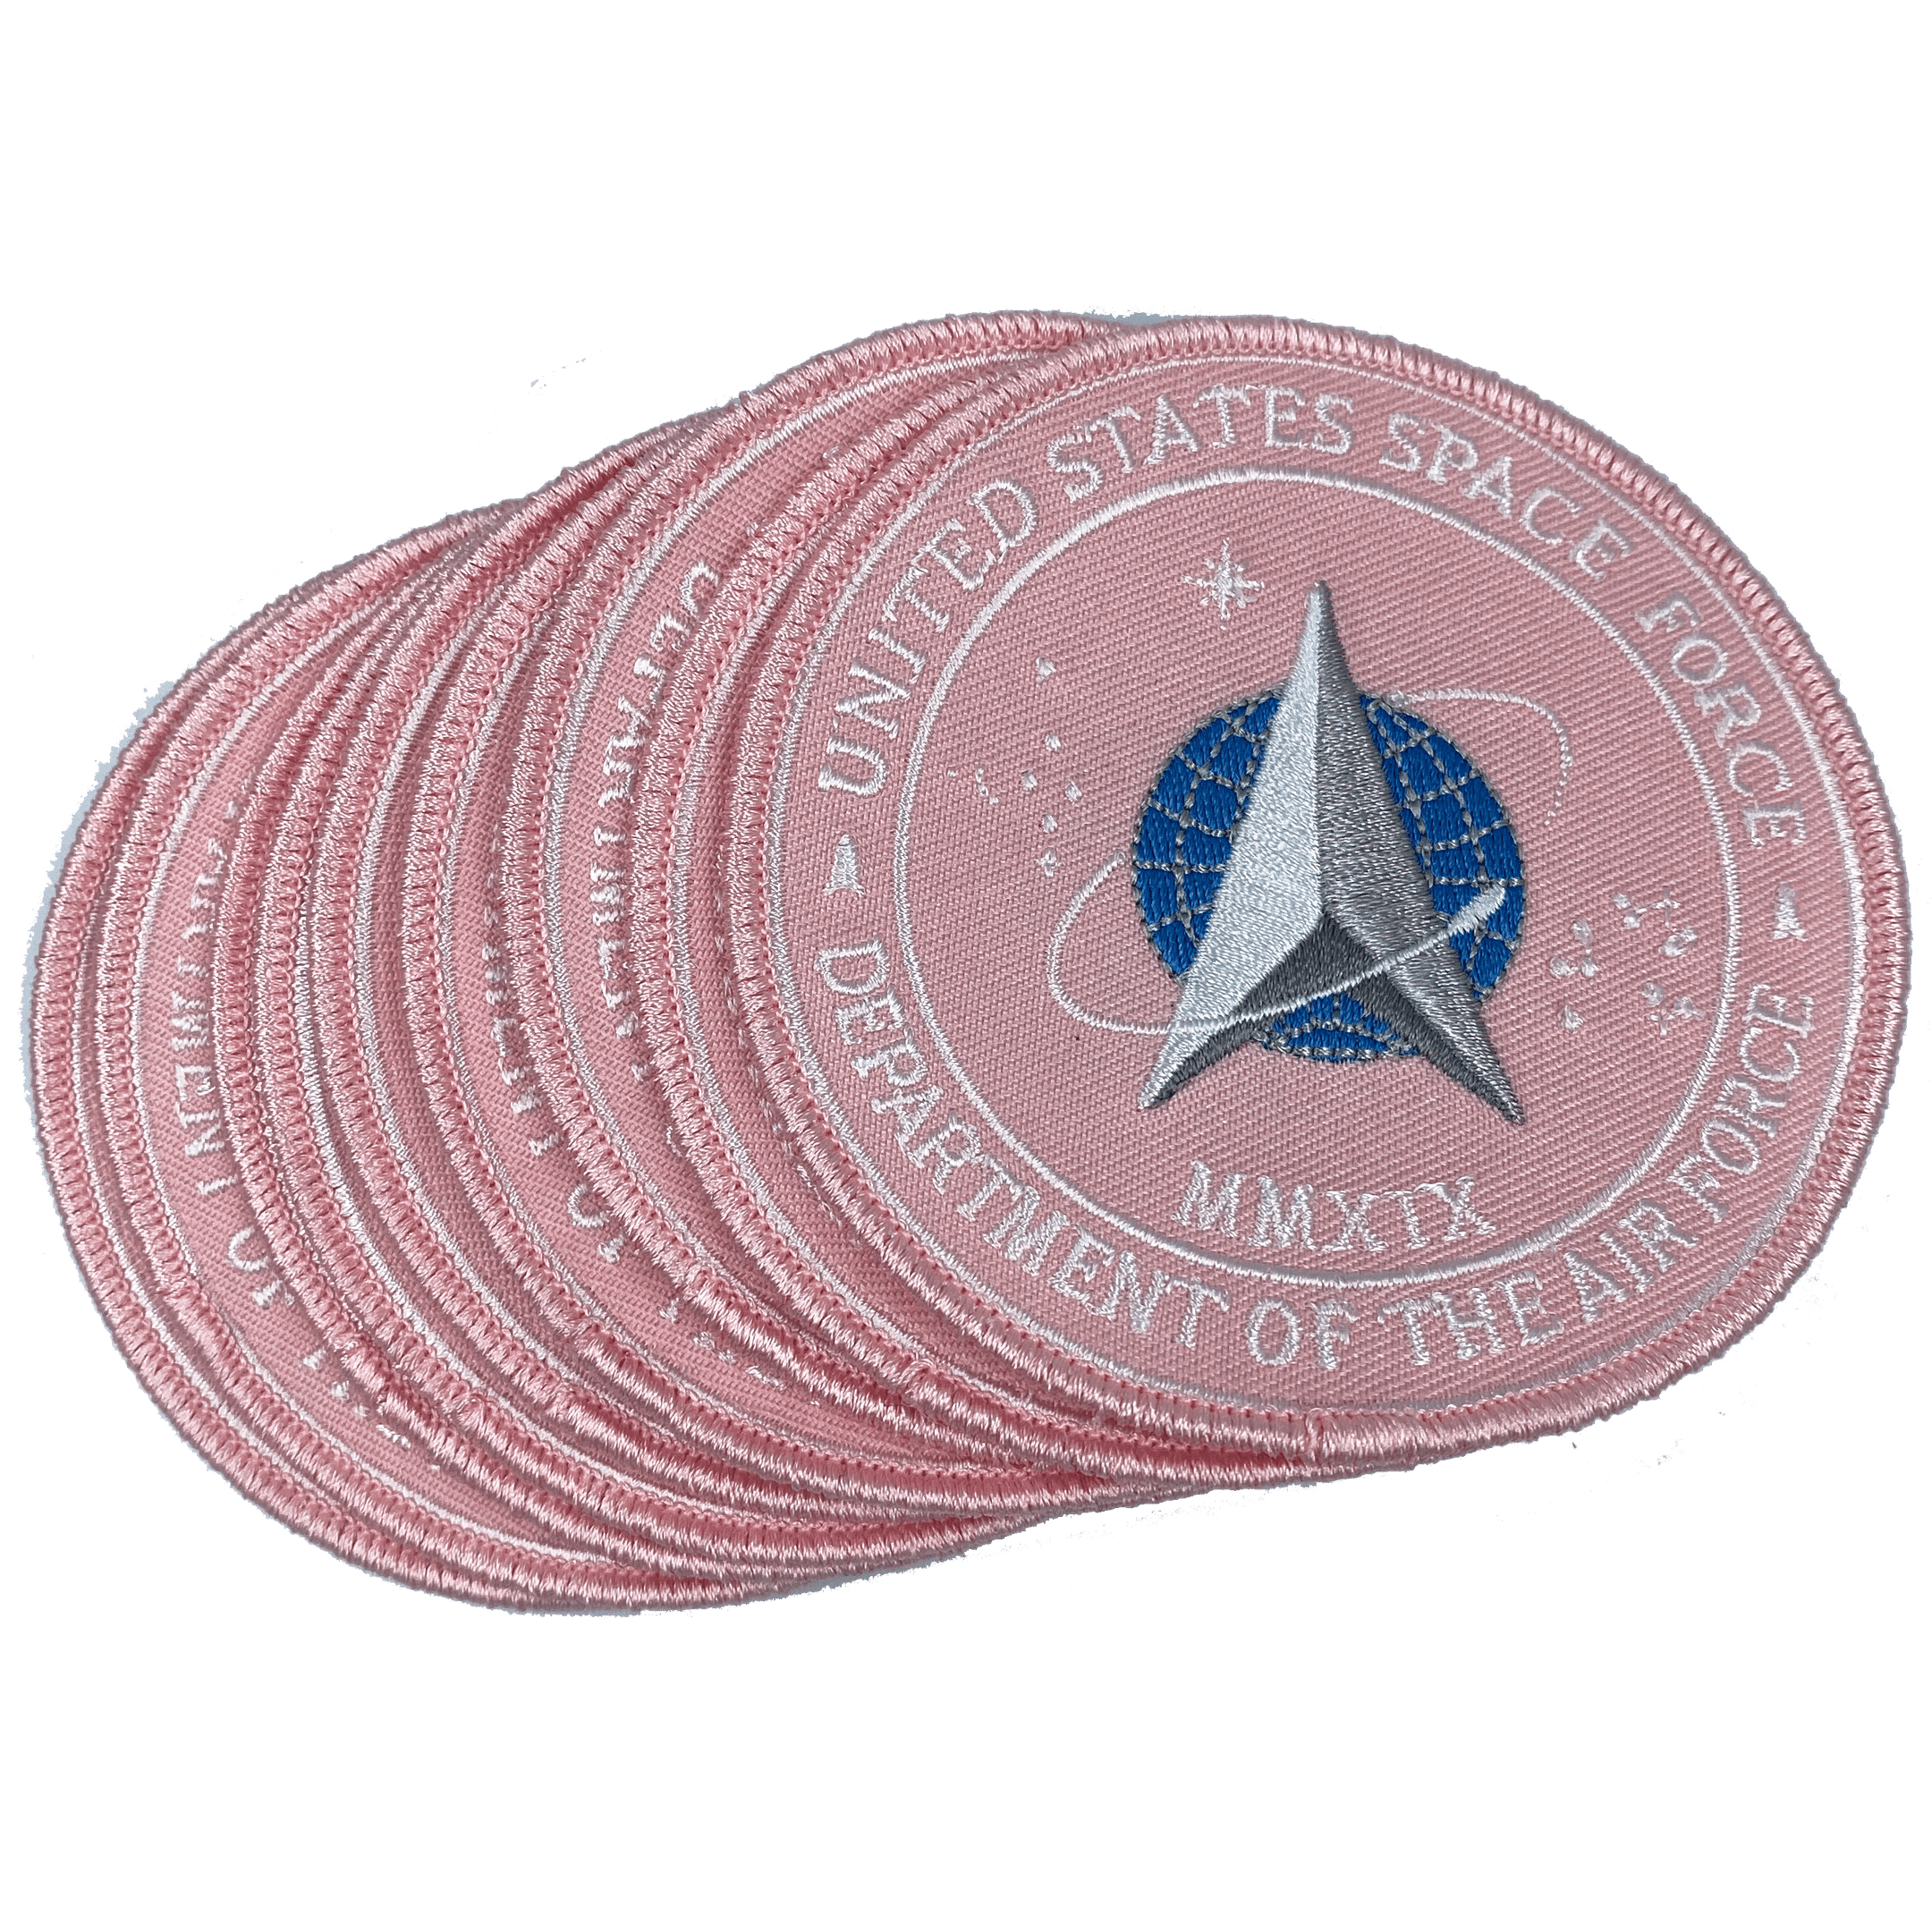 CL4-07 Pink breast Cancer Awareness United States Space Force Patch U.S Departm